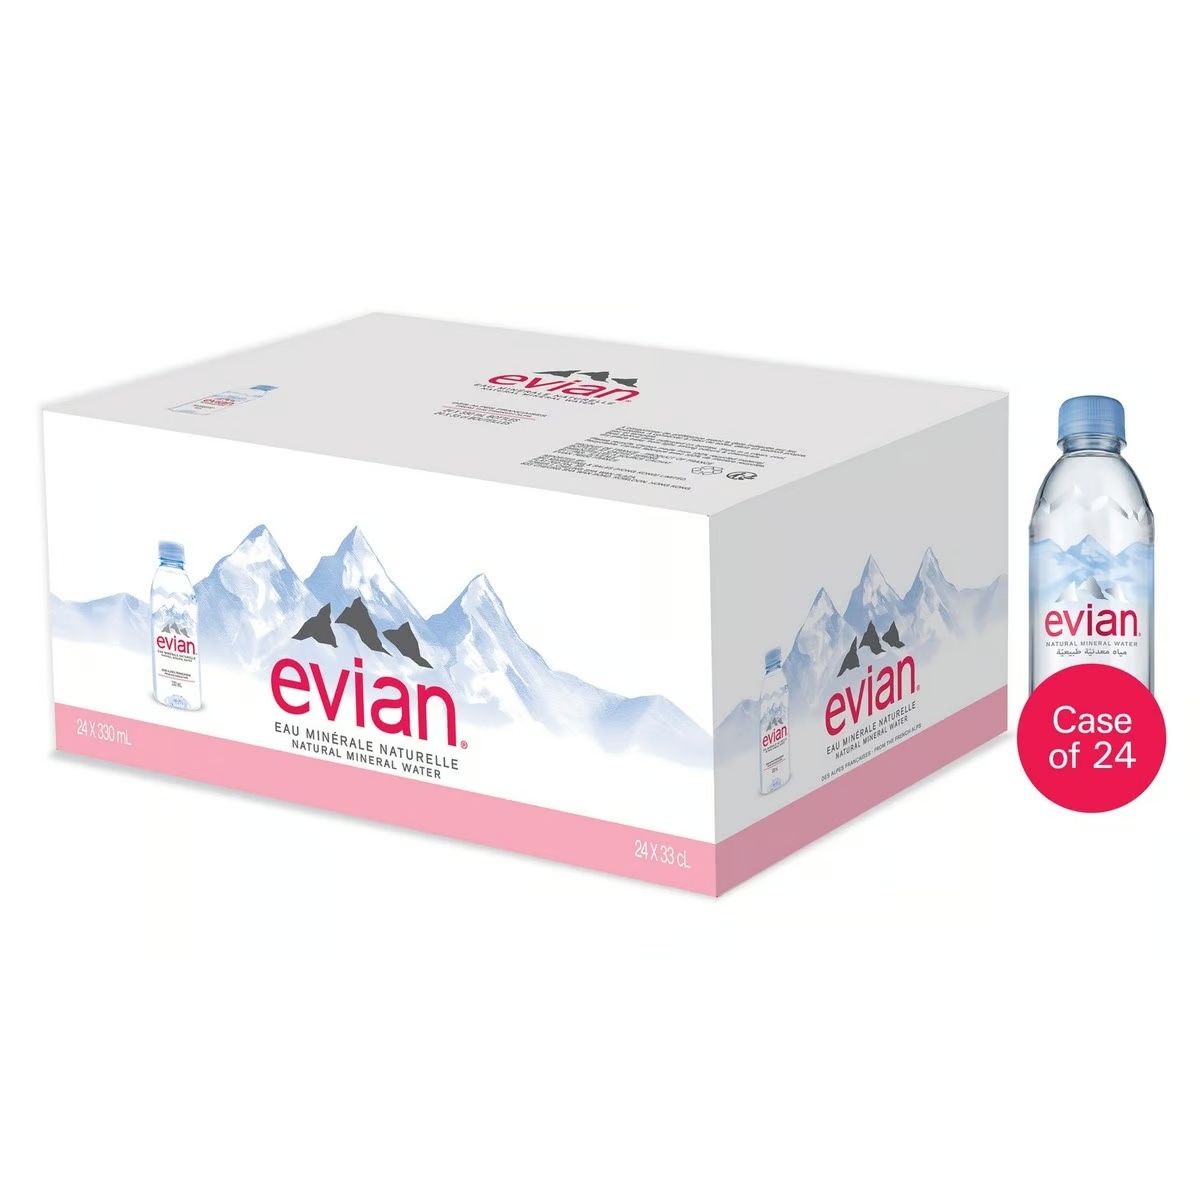 Would you like mineral water. Эвиан 0.5 ПЭТ. Вода Evian 0.5. Evian 0,330. Упаковка Evian 1500 ml.